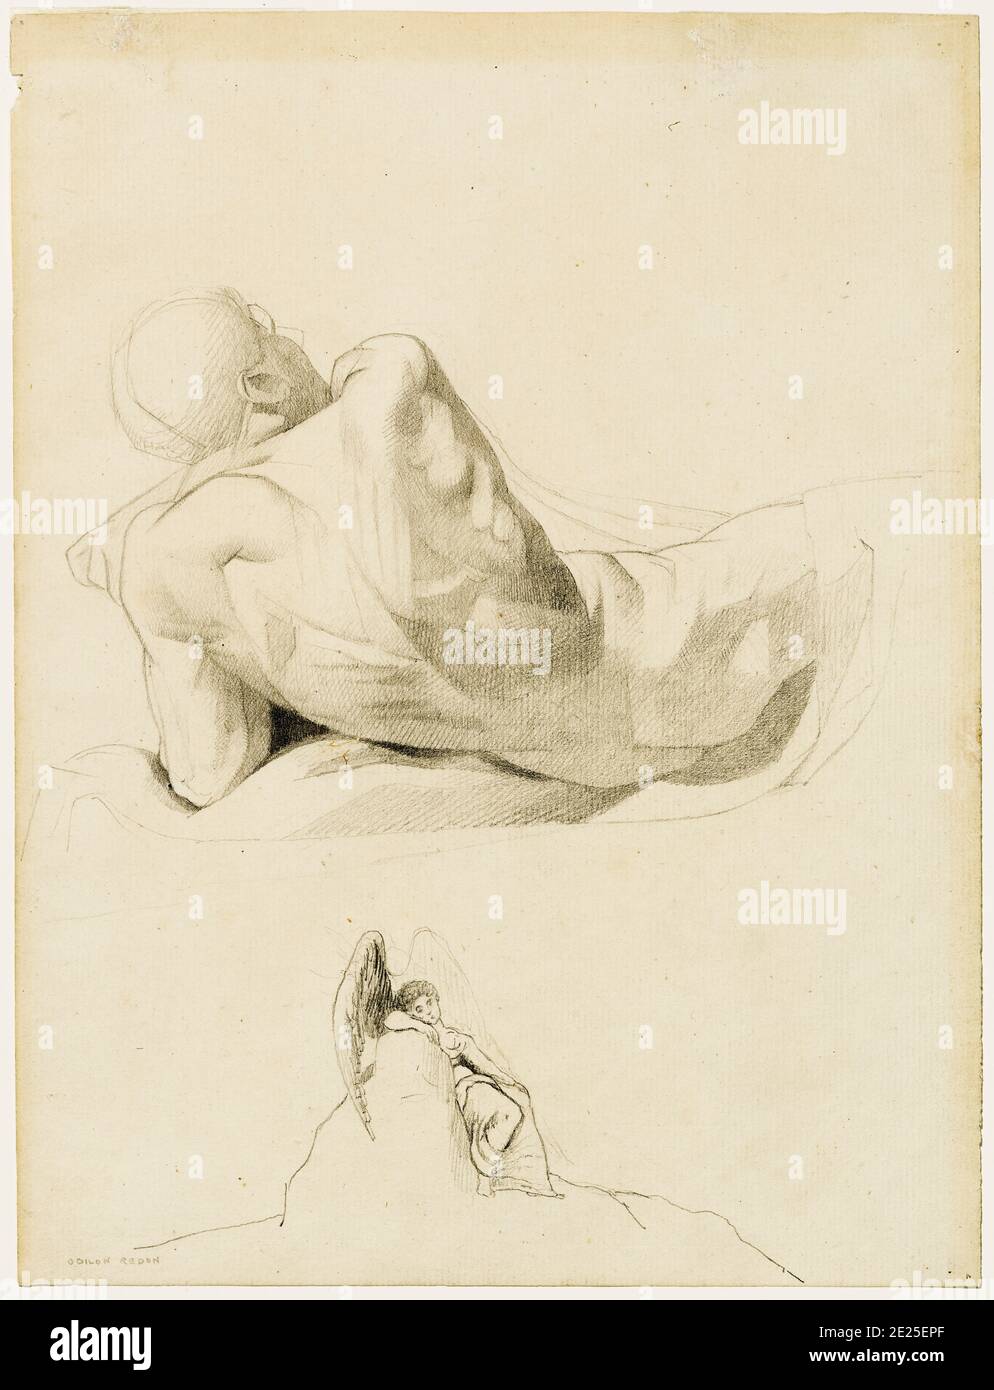 Odilon Redon, Study of a man's Back and a melancholy Angel, Zeichnung, 1865 Stockfoto